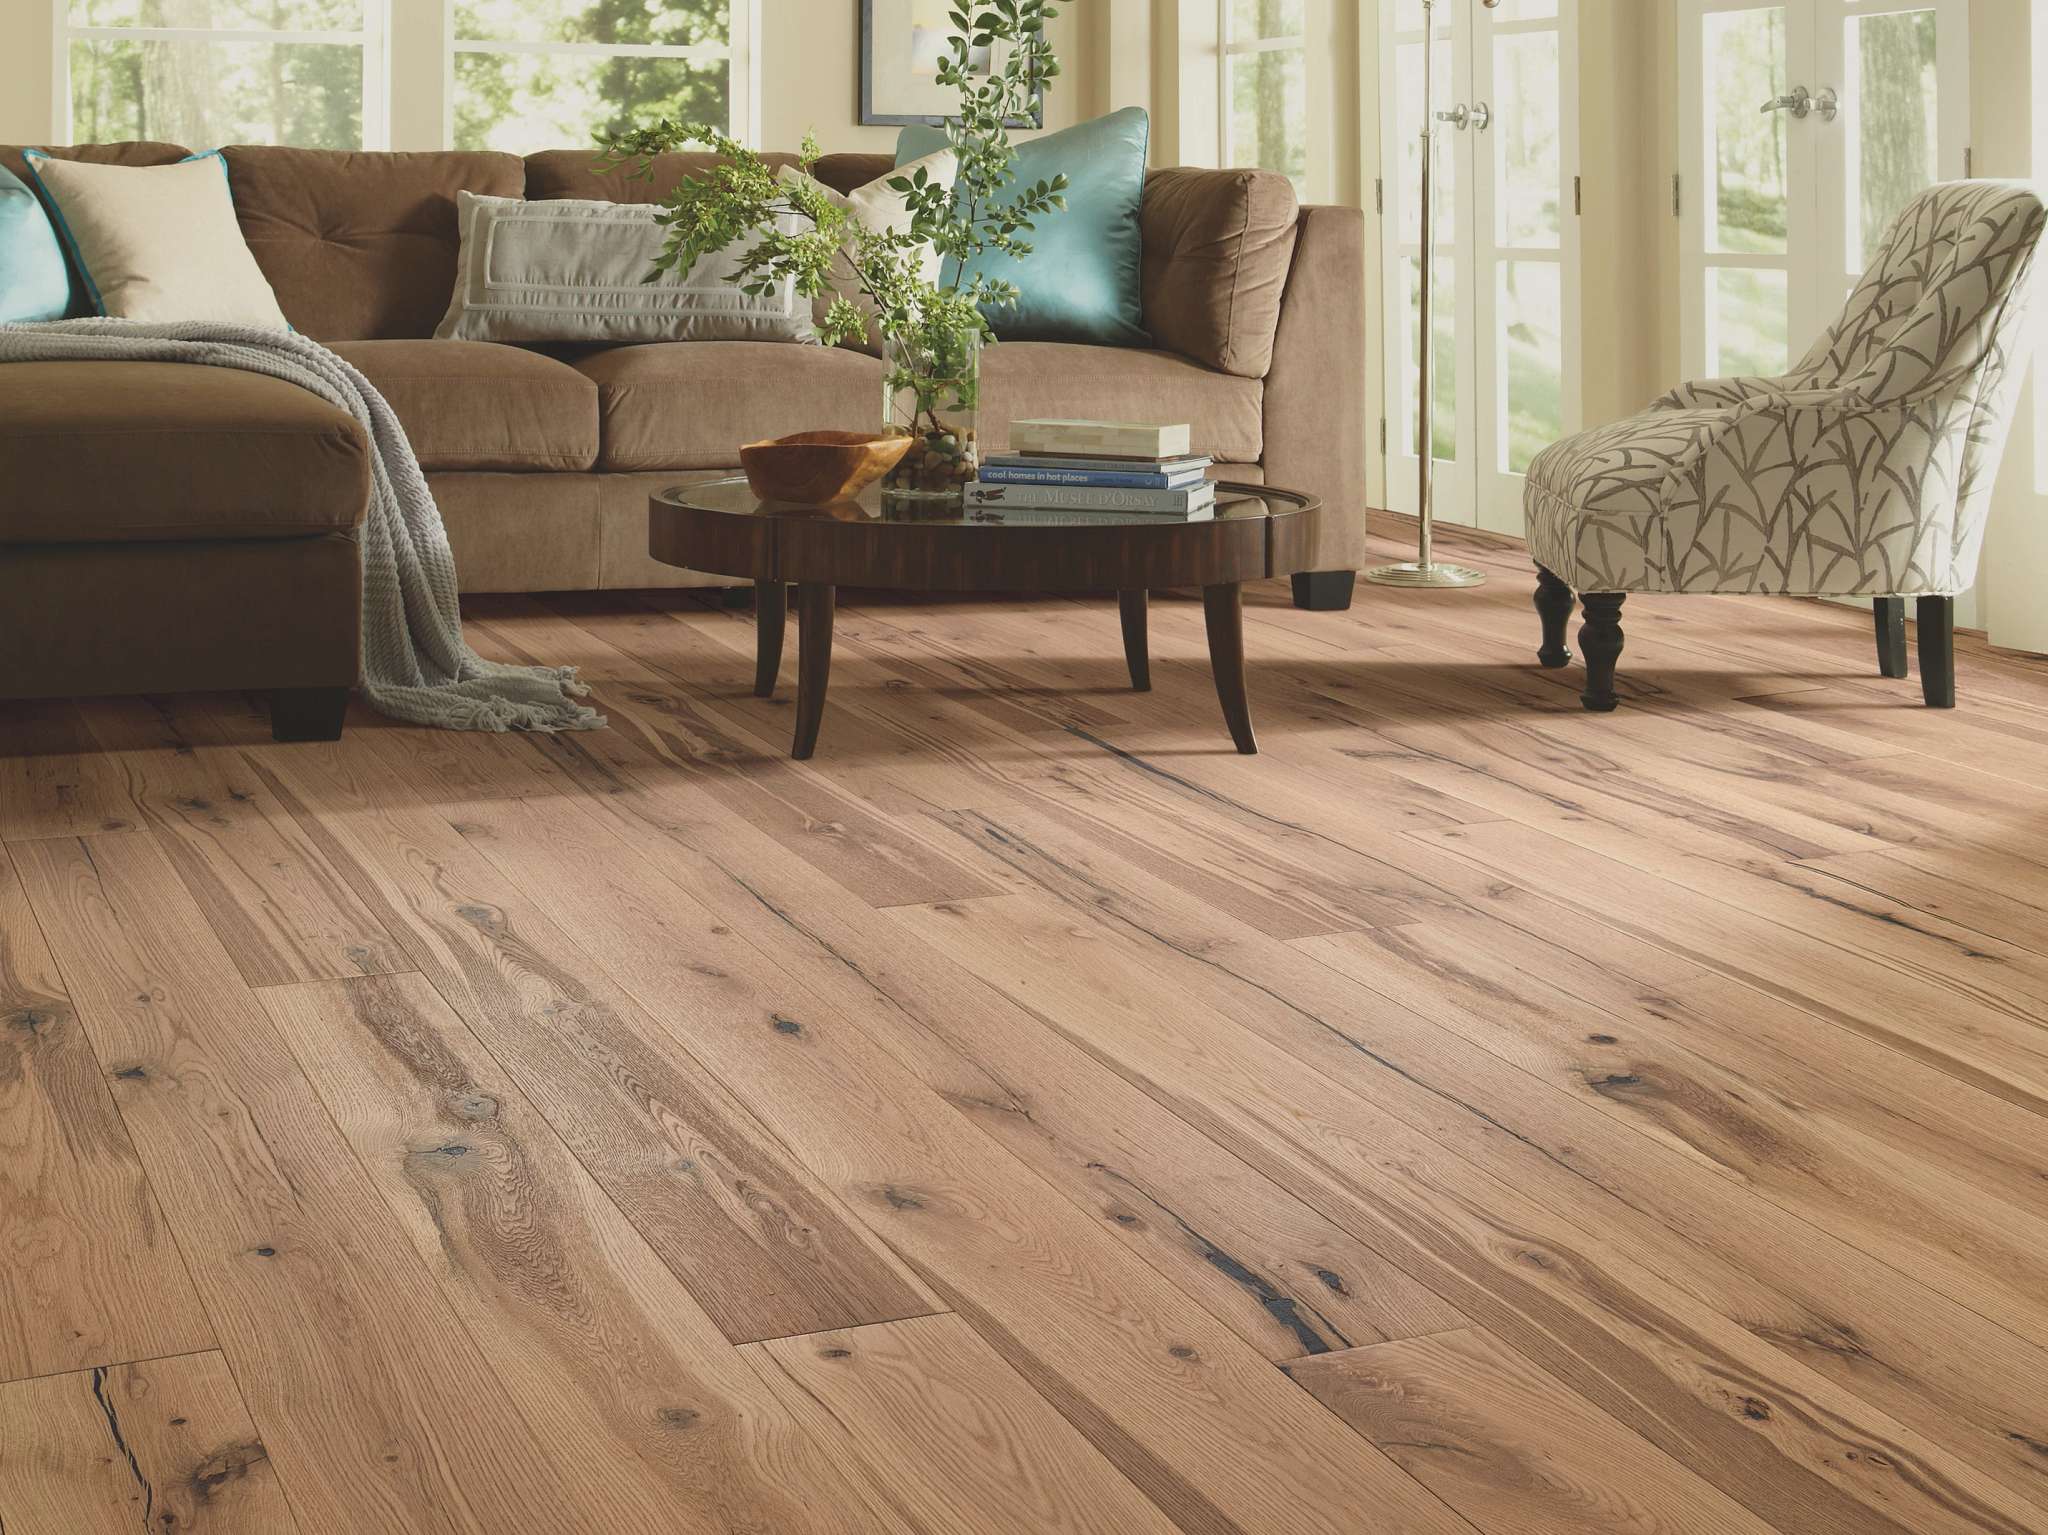 Top 7 Flooring Types That Will Make